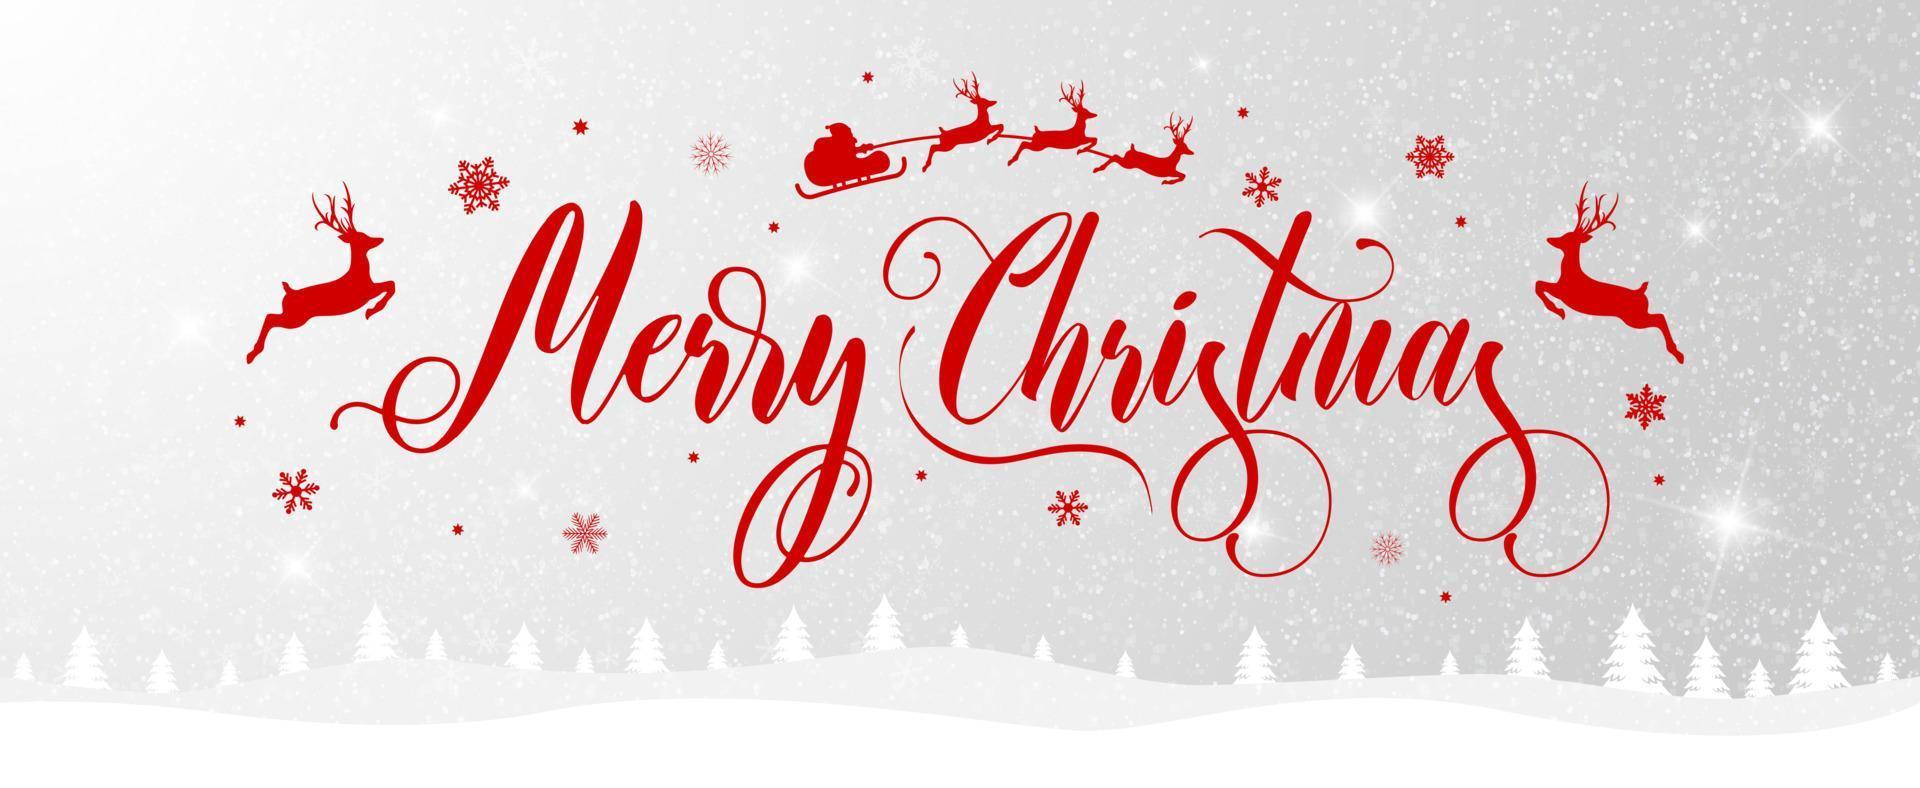 Merry Christmas and happy New Year landscape on the winter snowfall background. Christmas banner with lettering and snow. vector